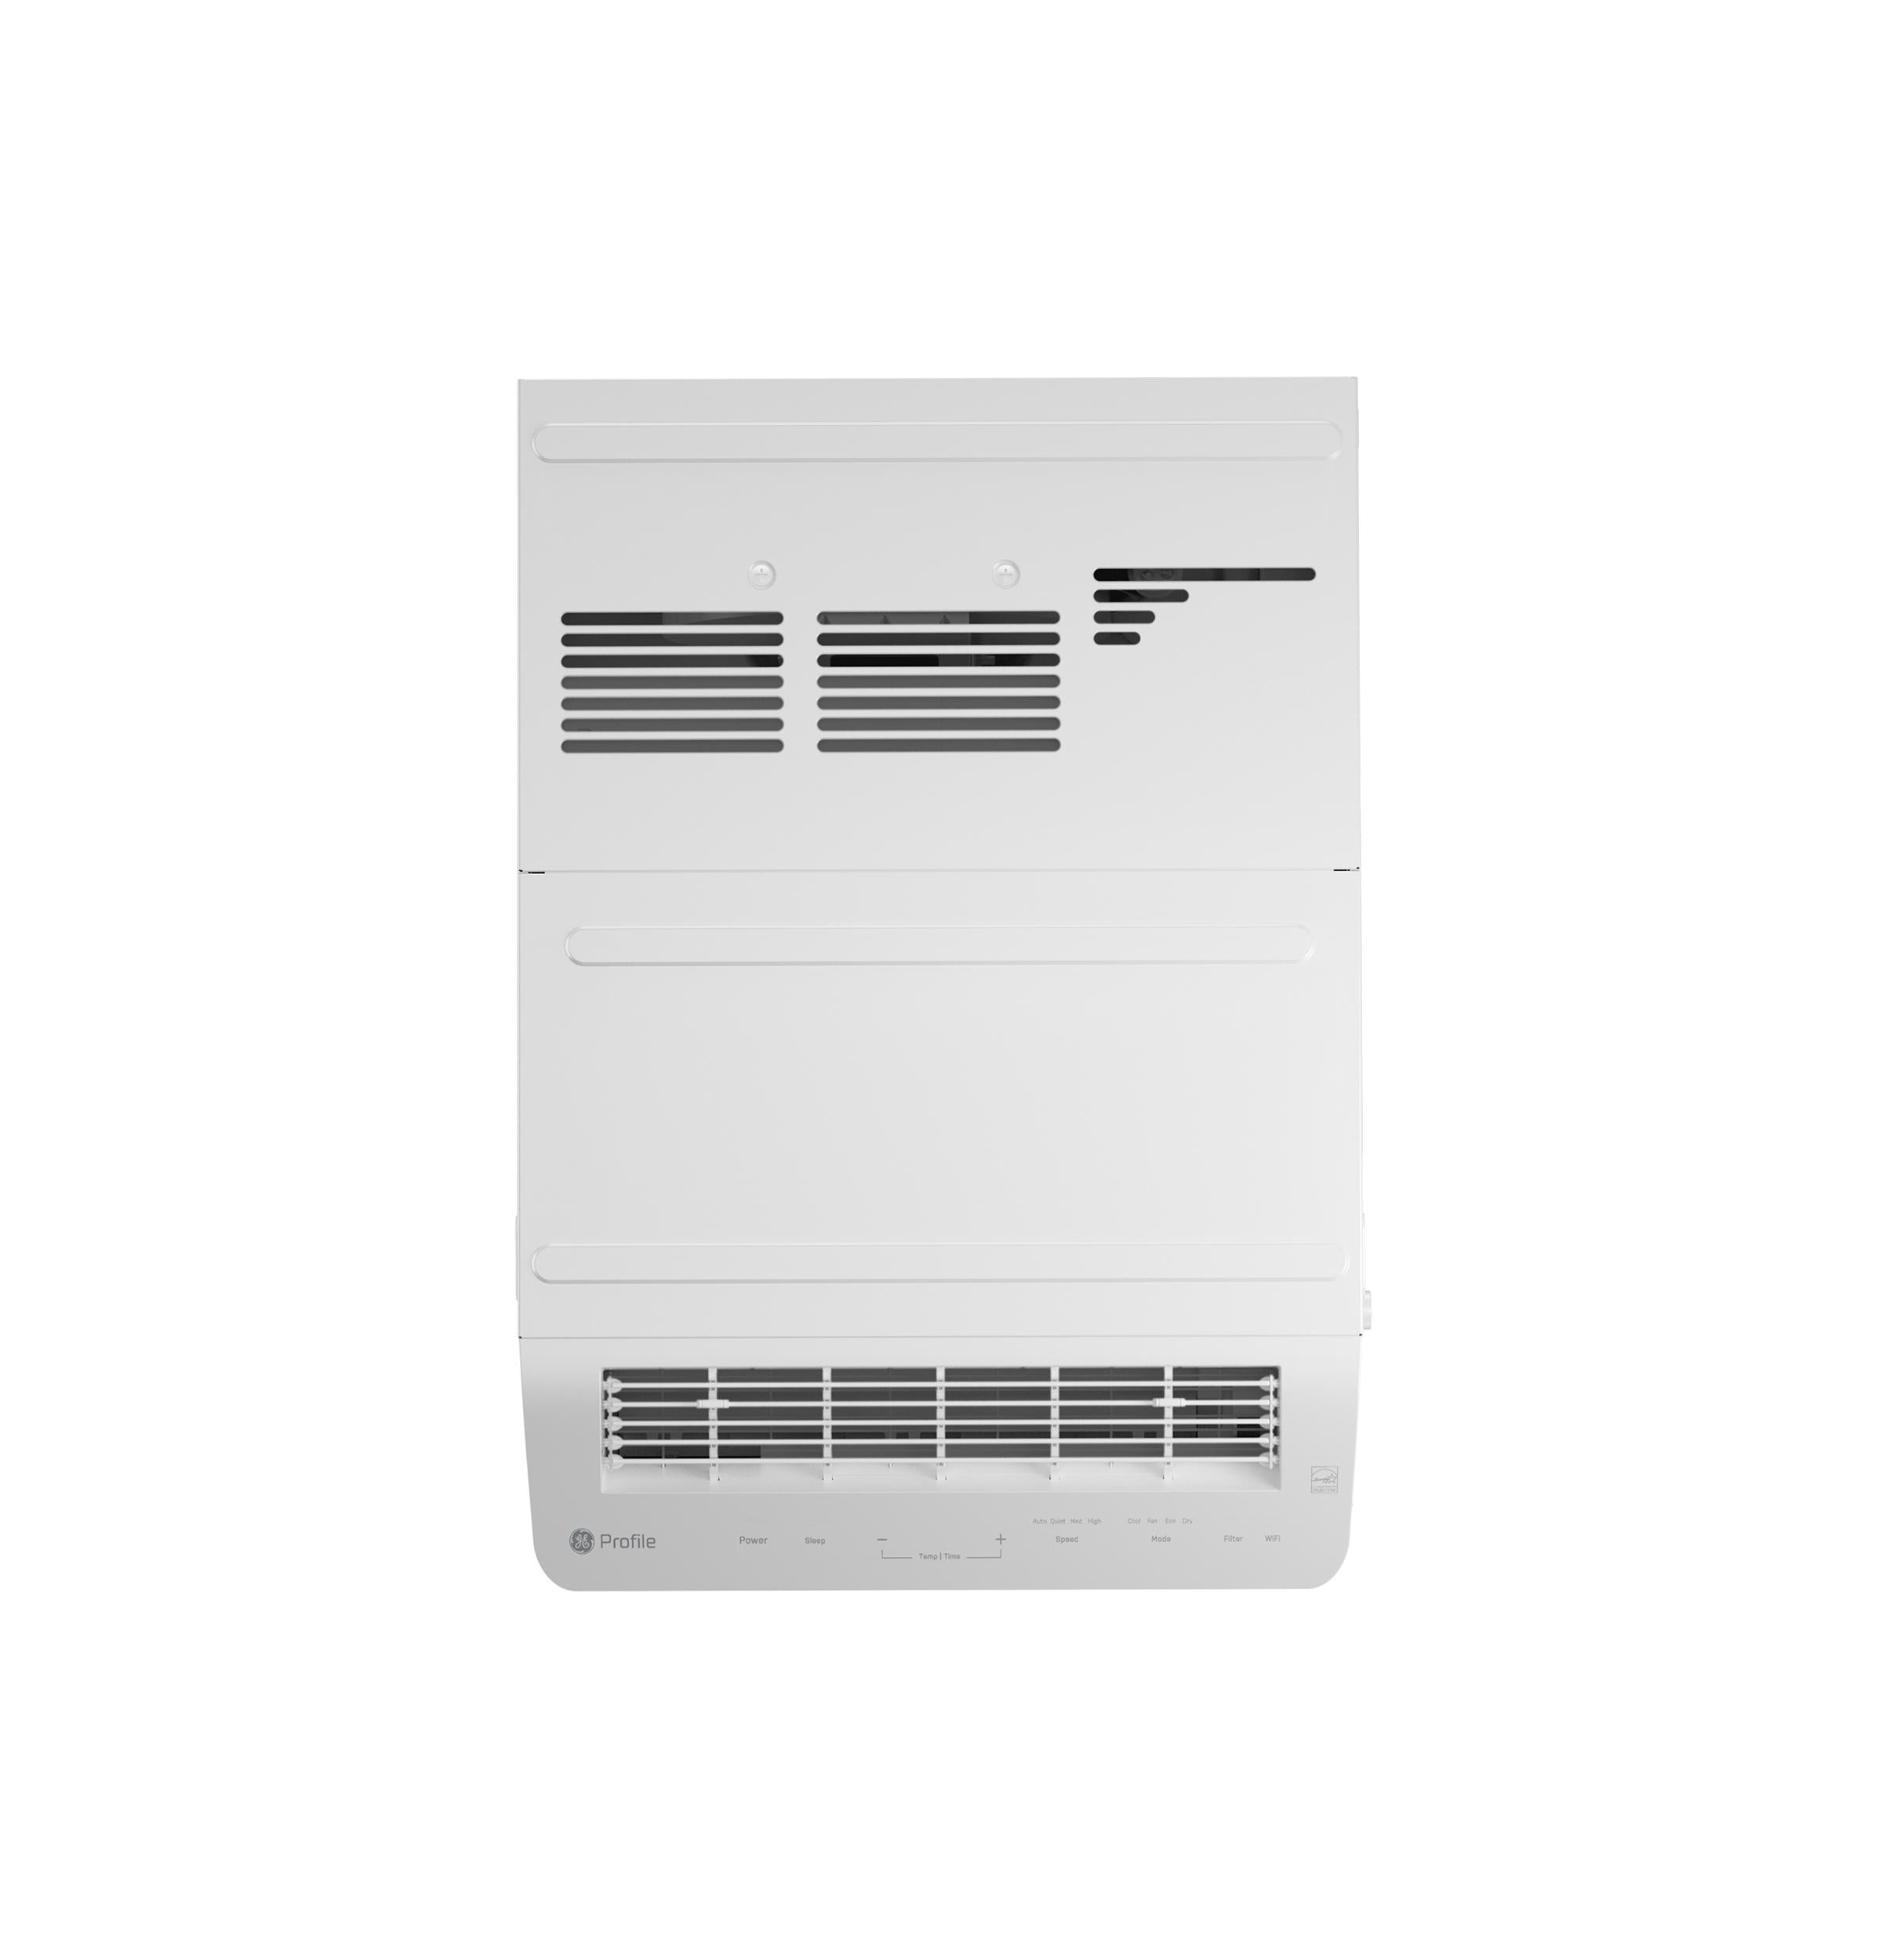 GE Profile ClearView™ ENERGY STAR® 12,200 BTU Inverter Smart Ultra Quiet Window Air Conditioner for Large Rooms up to 550 sq. ft.